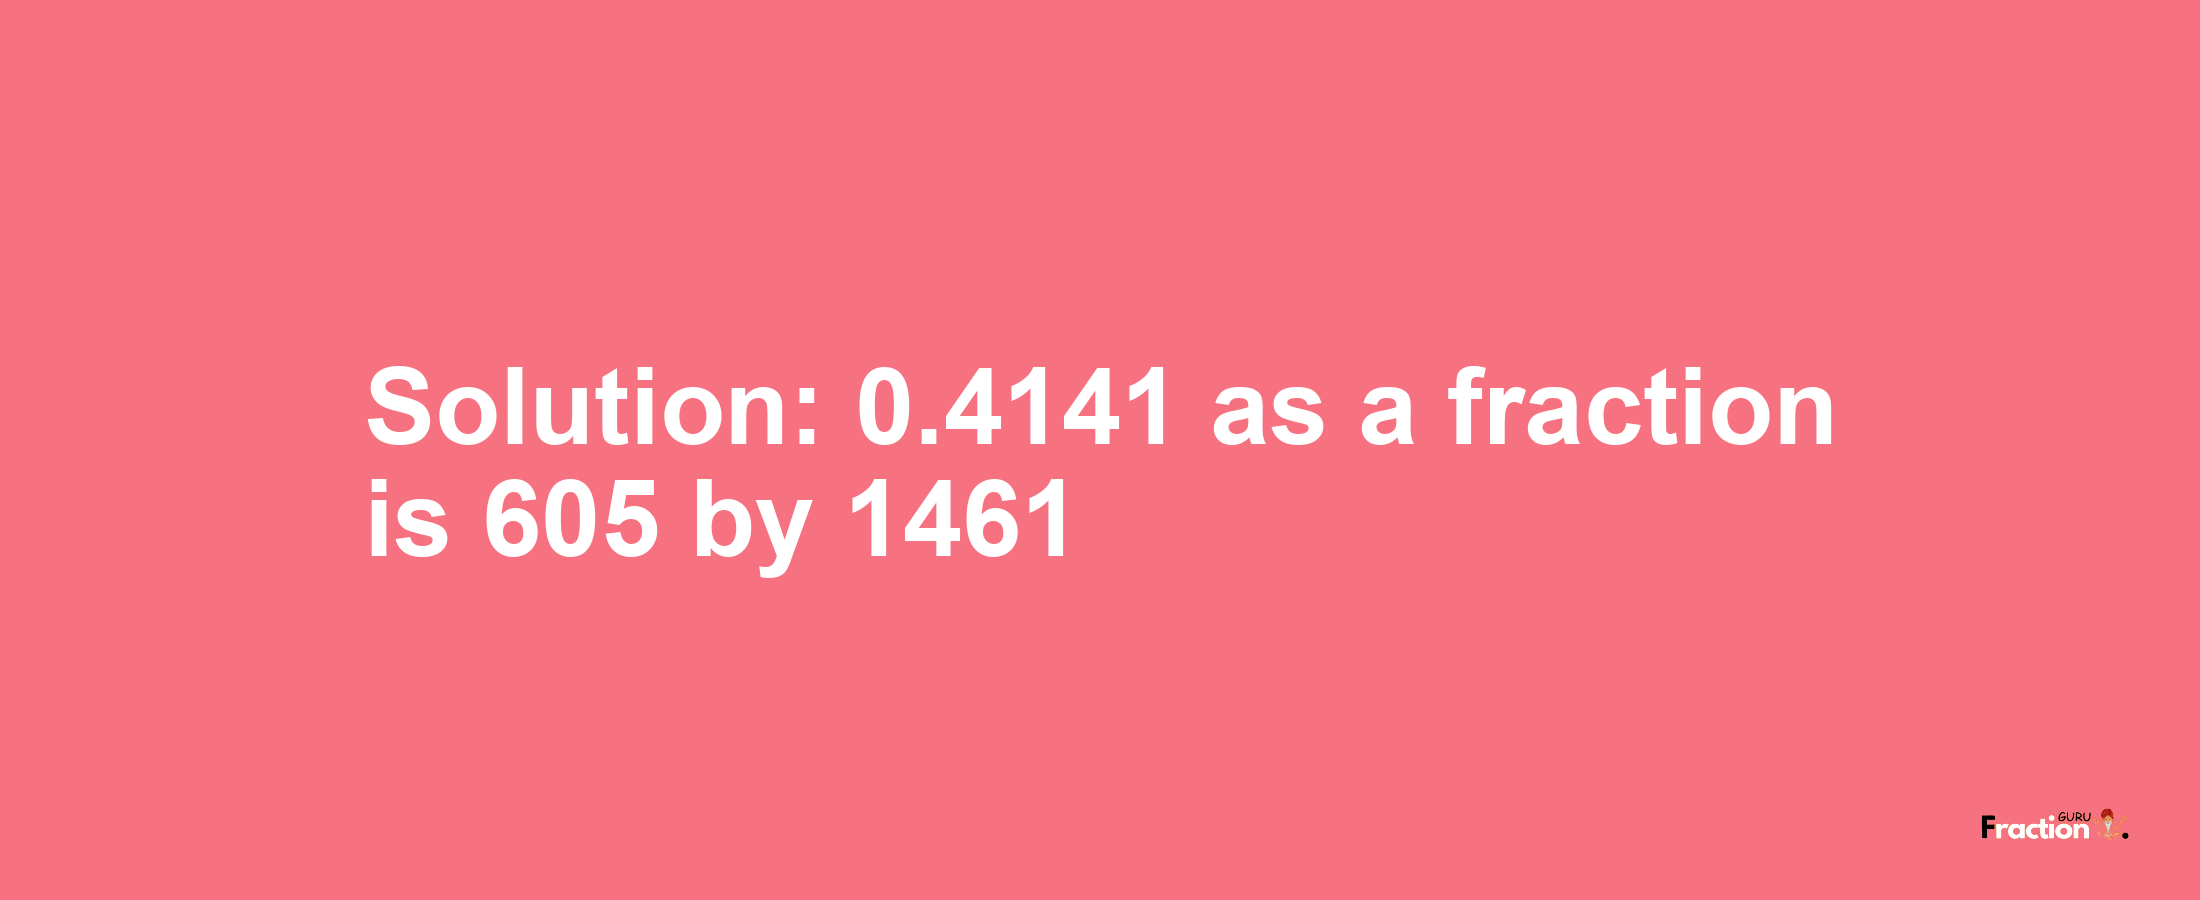 Solution:0.4141 as a fraction is 605/1461